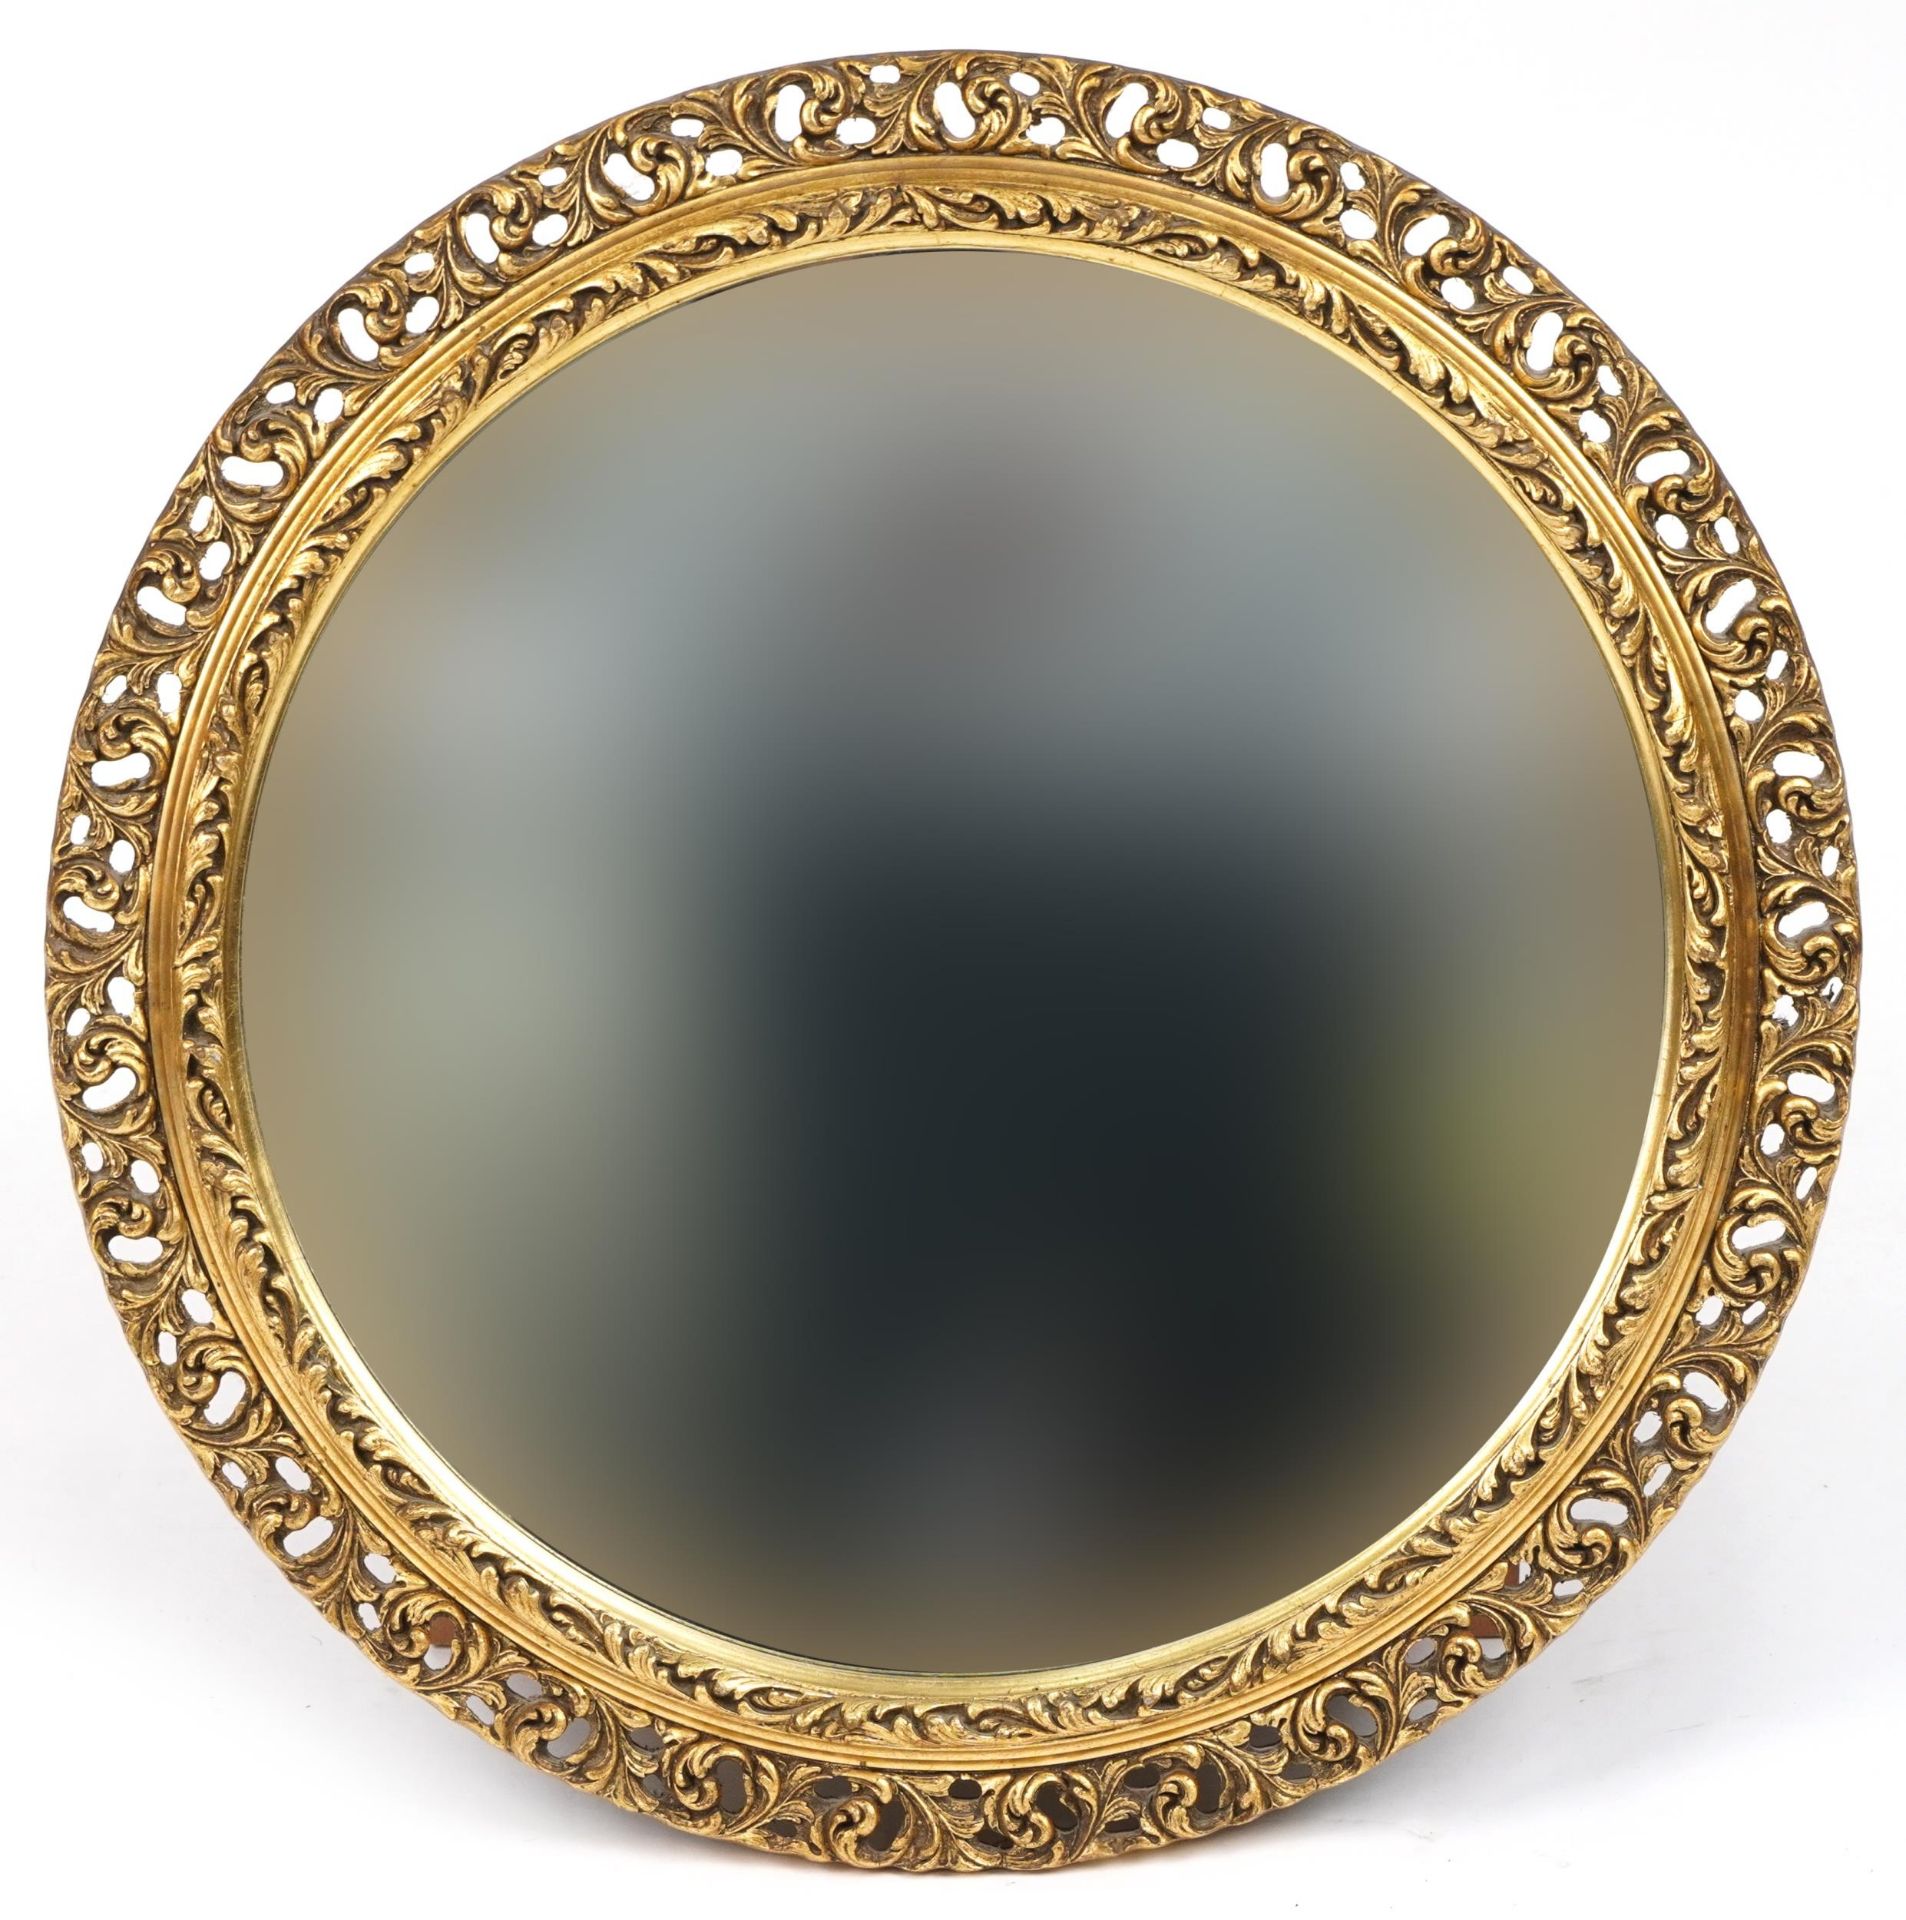 Circular gilt framed acanthus design wall mirror with bevelled glass, 56cm in diameter